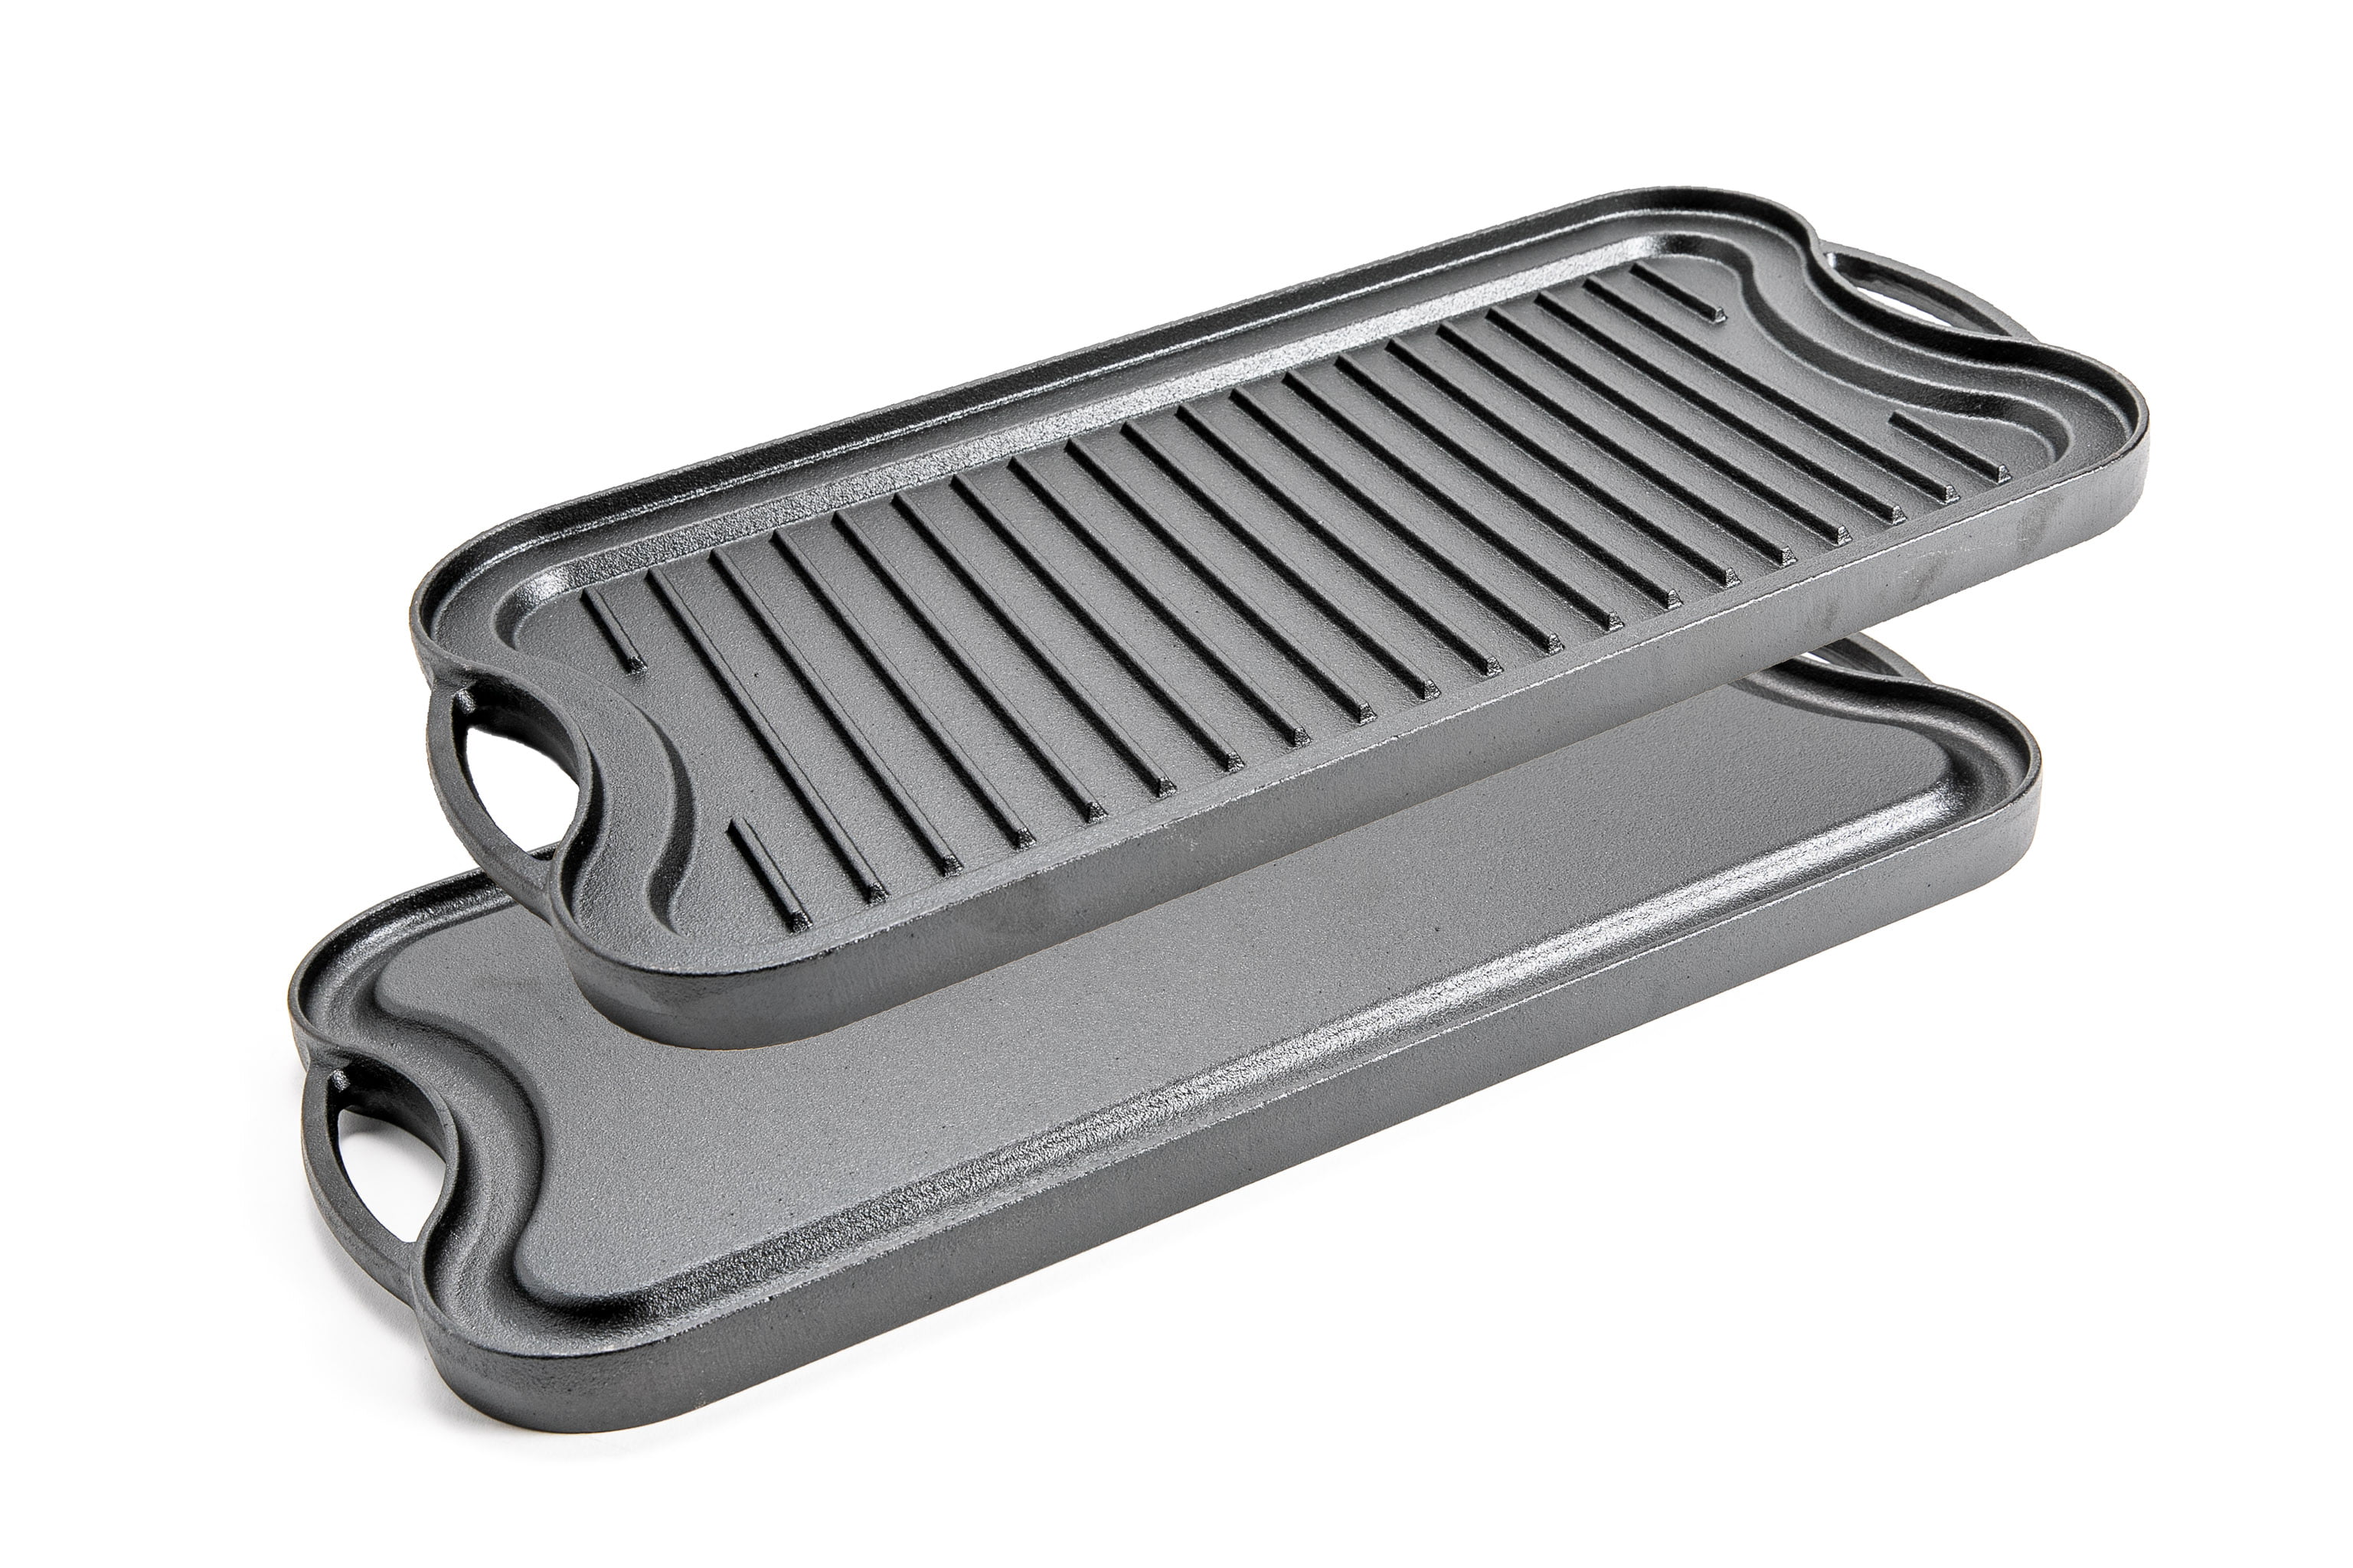 Wayfair, Induction Grill & Griddle Pans, Up to 20% Off Until 11/20